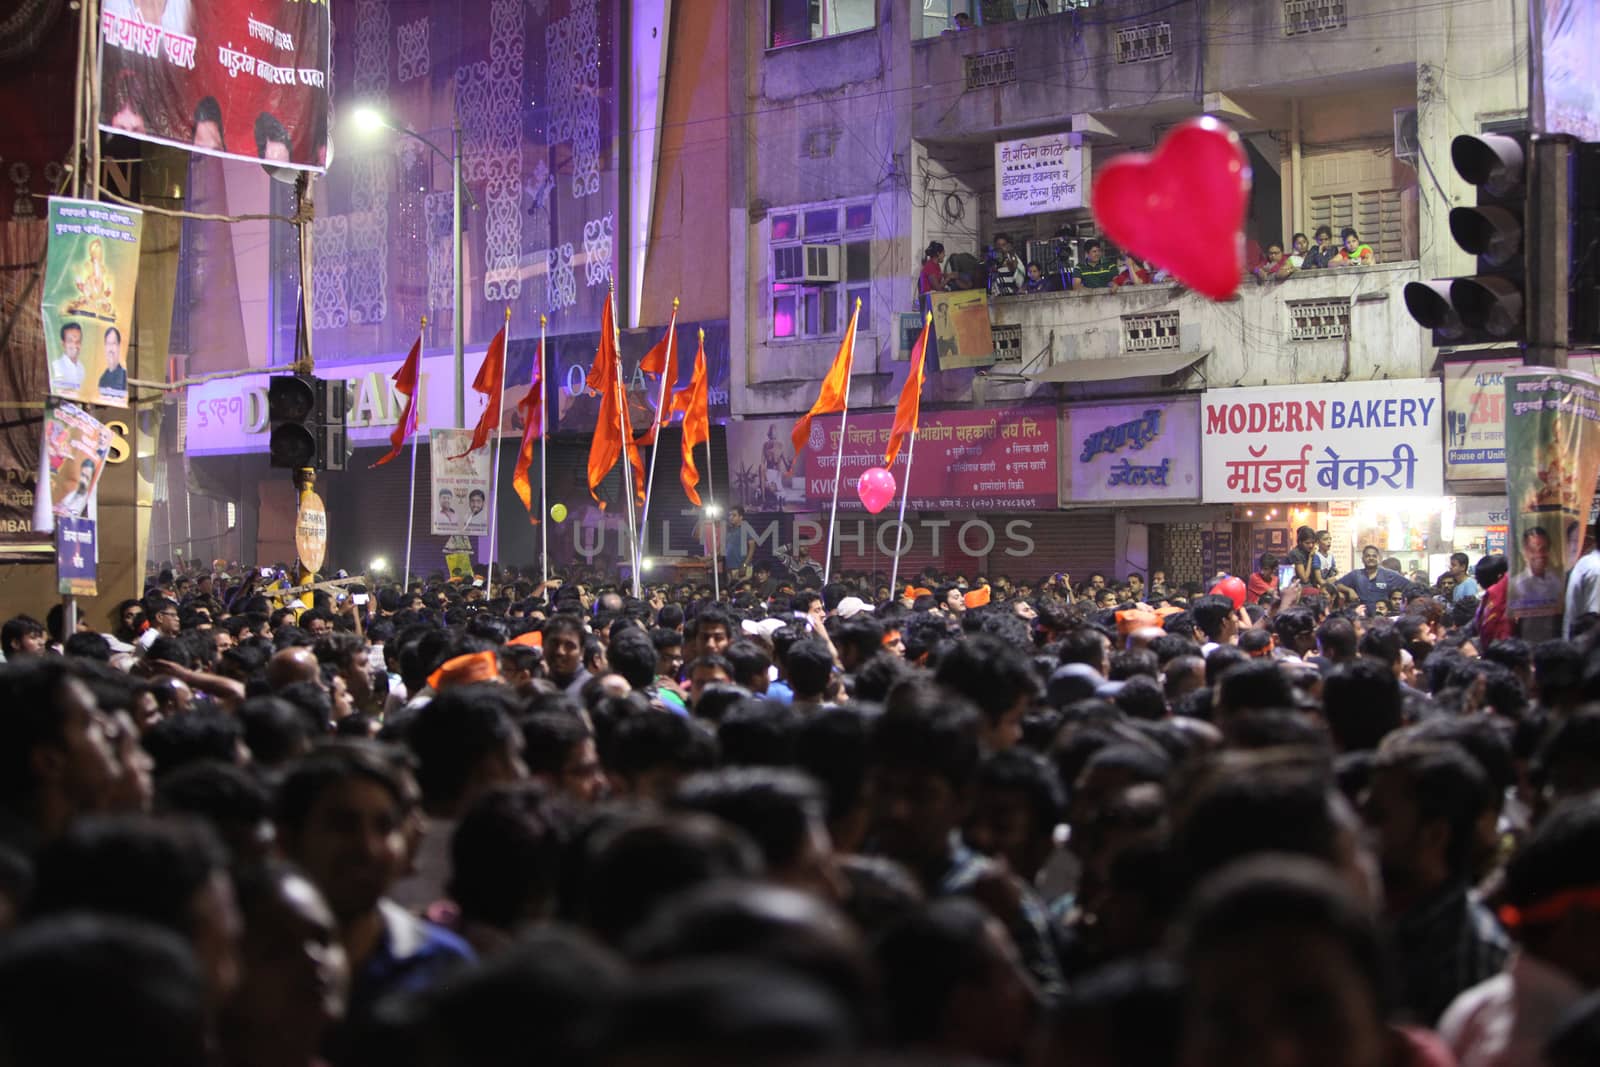 Pune, India - September 28, 2015: Crowds at one of the square du by thefinalmiracle